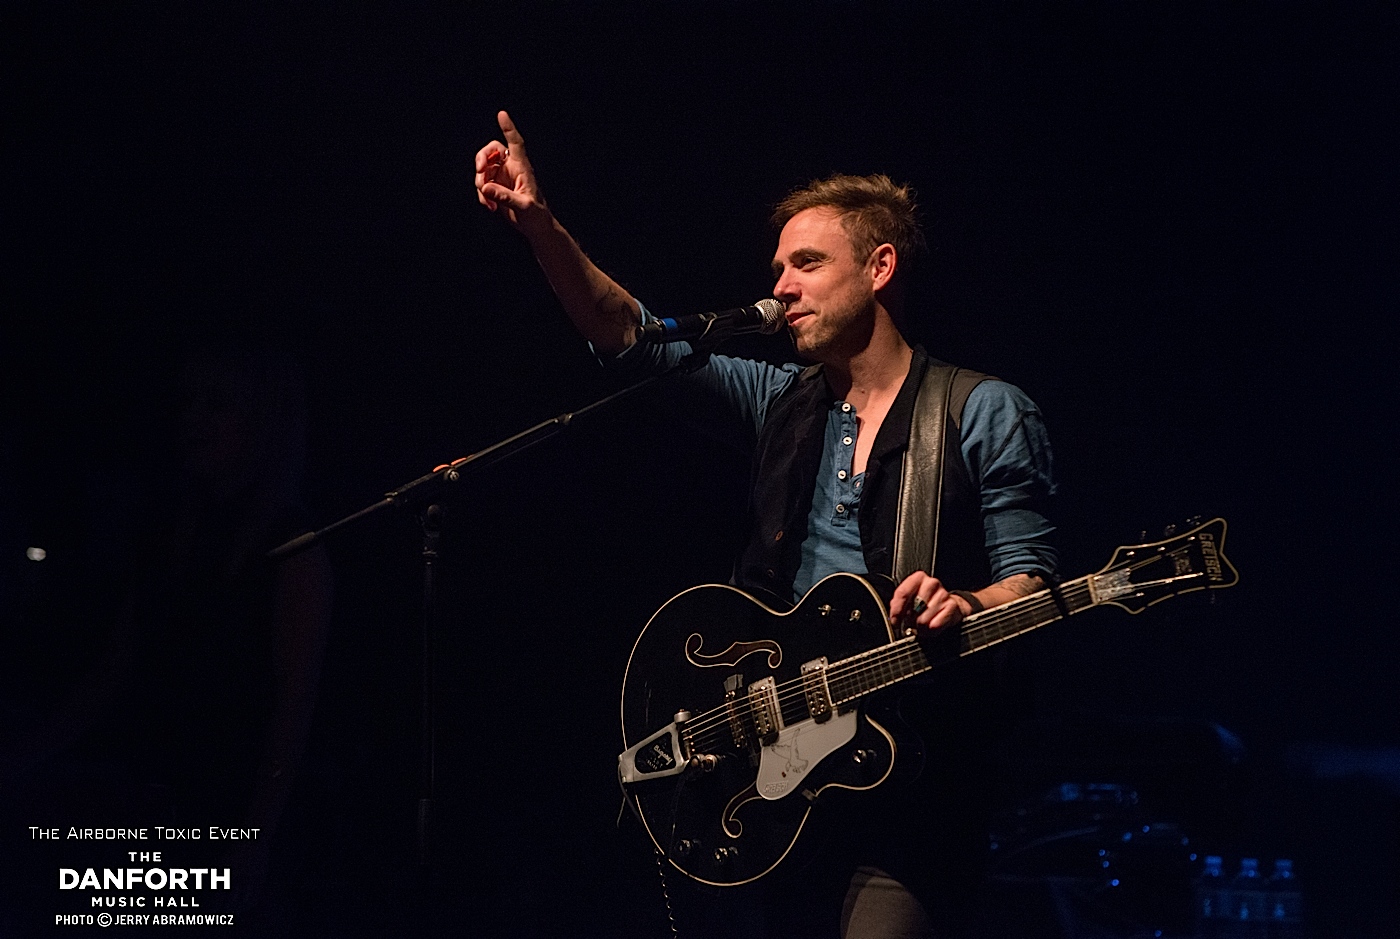 20130514 The Airborne Toxic Event performs at The Danforth Music Hall Toronto 0122